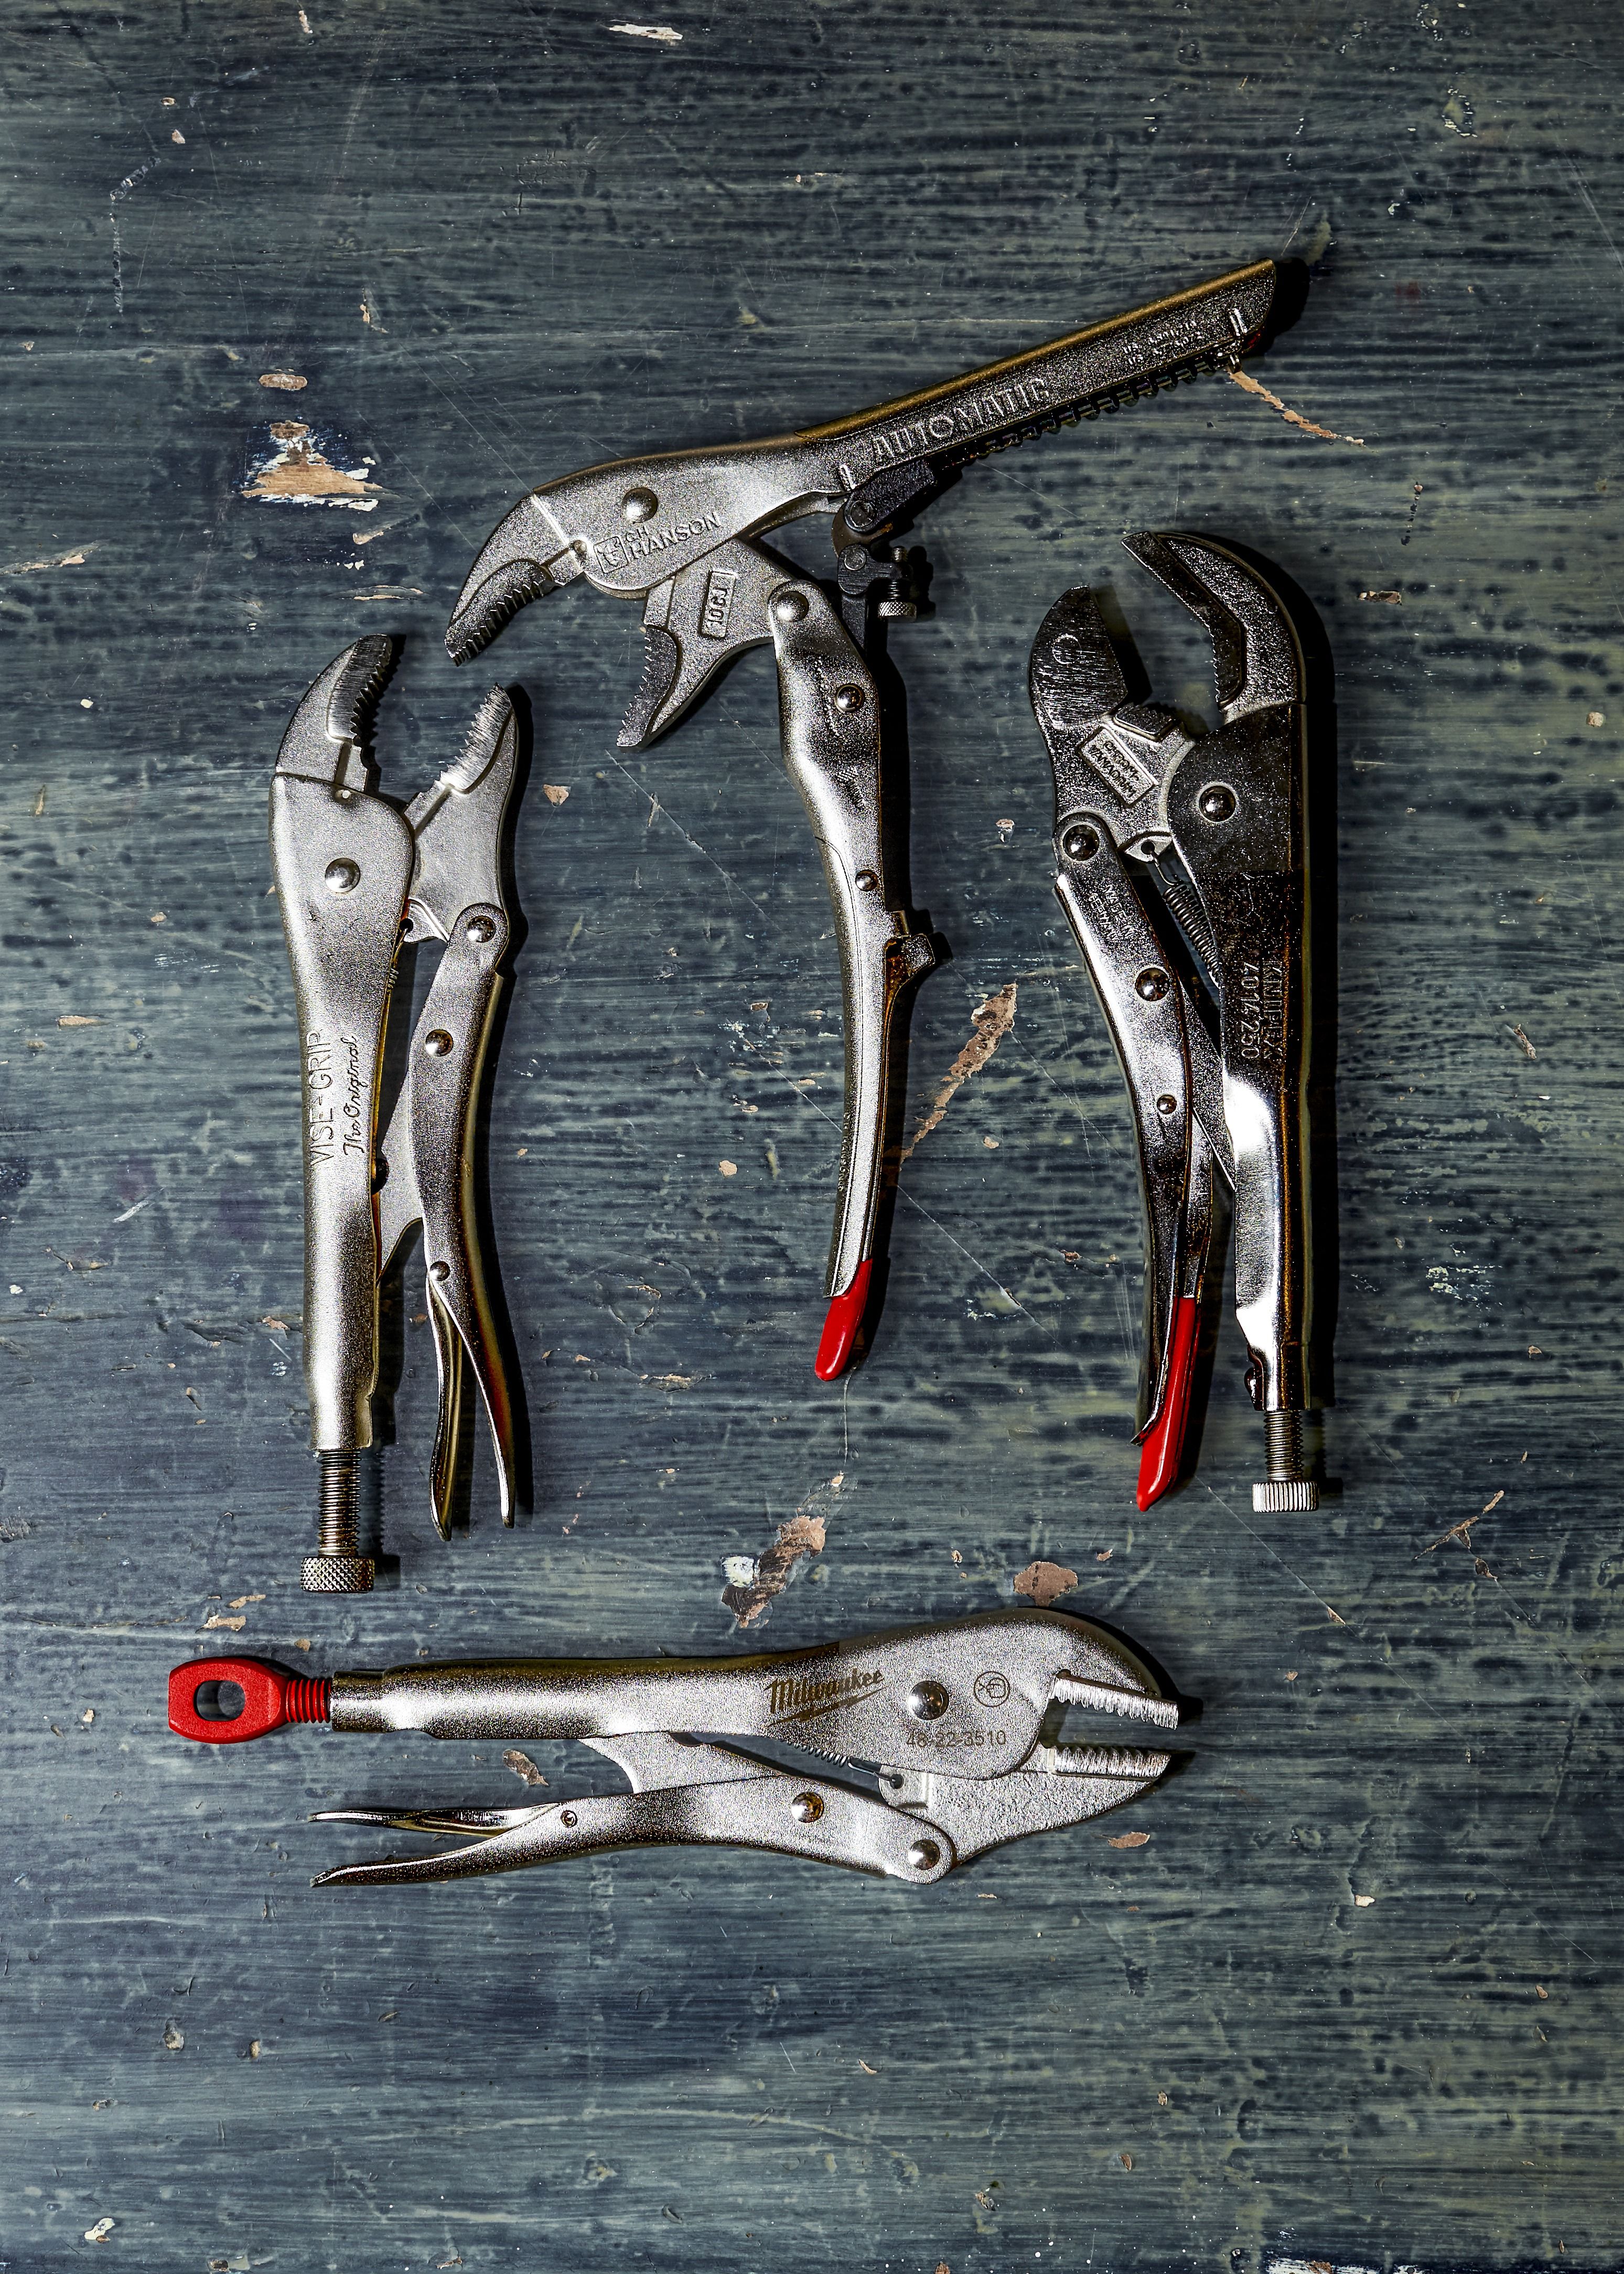 The Best Locking Pliers, According to 9,000+ Customer Reviews